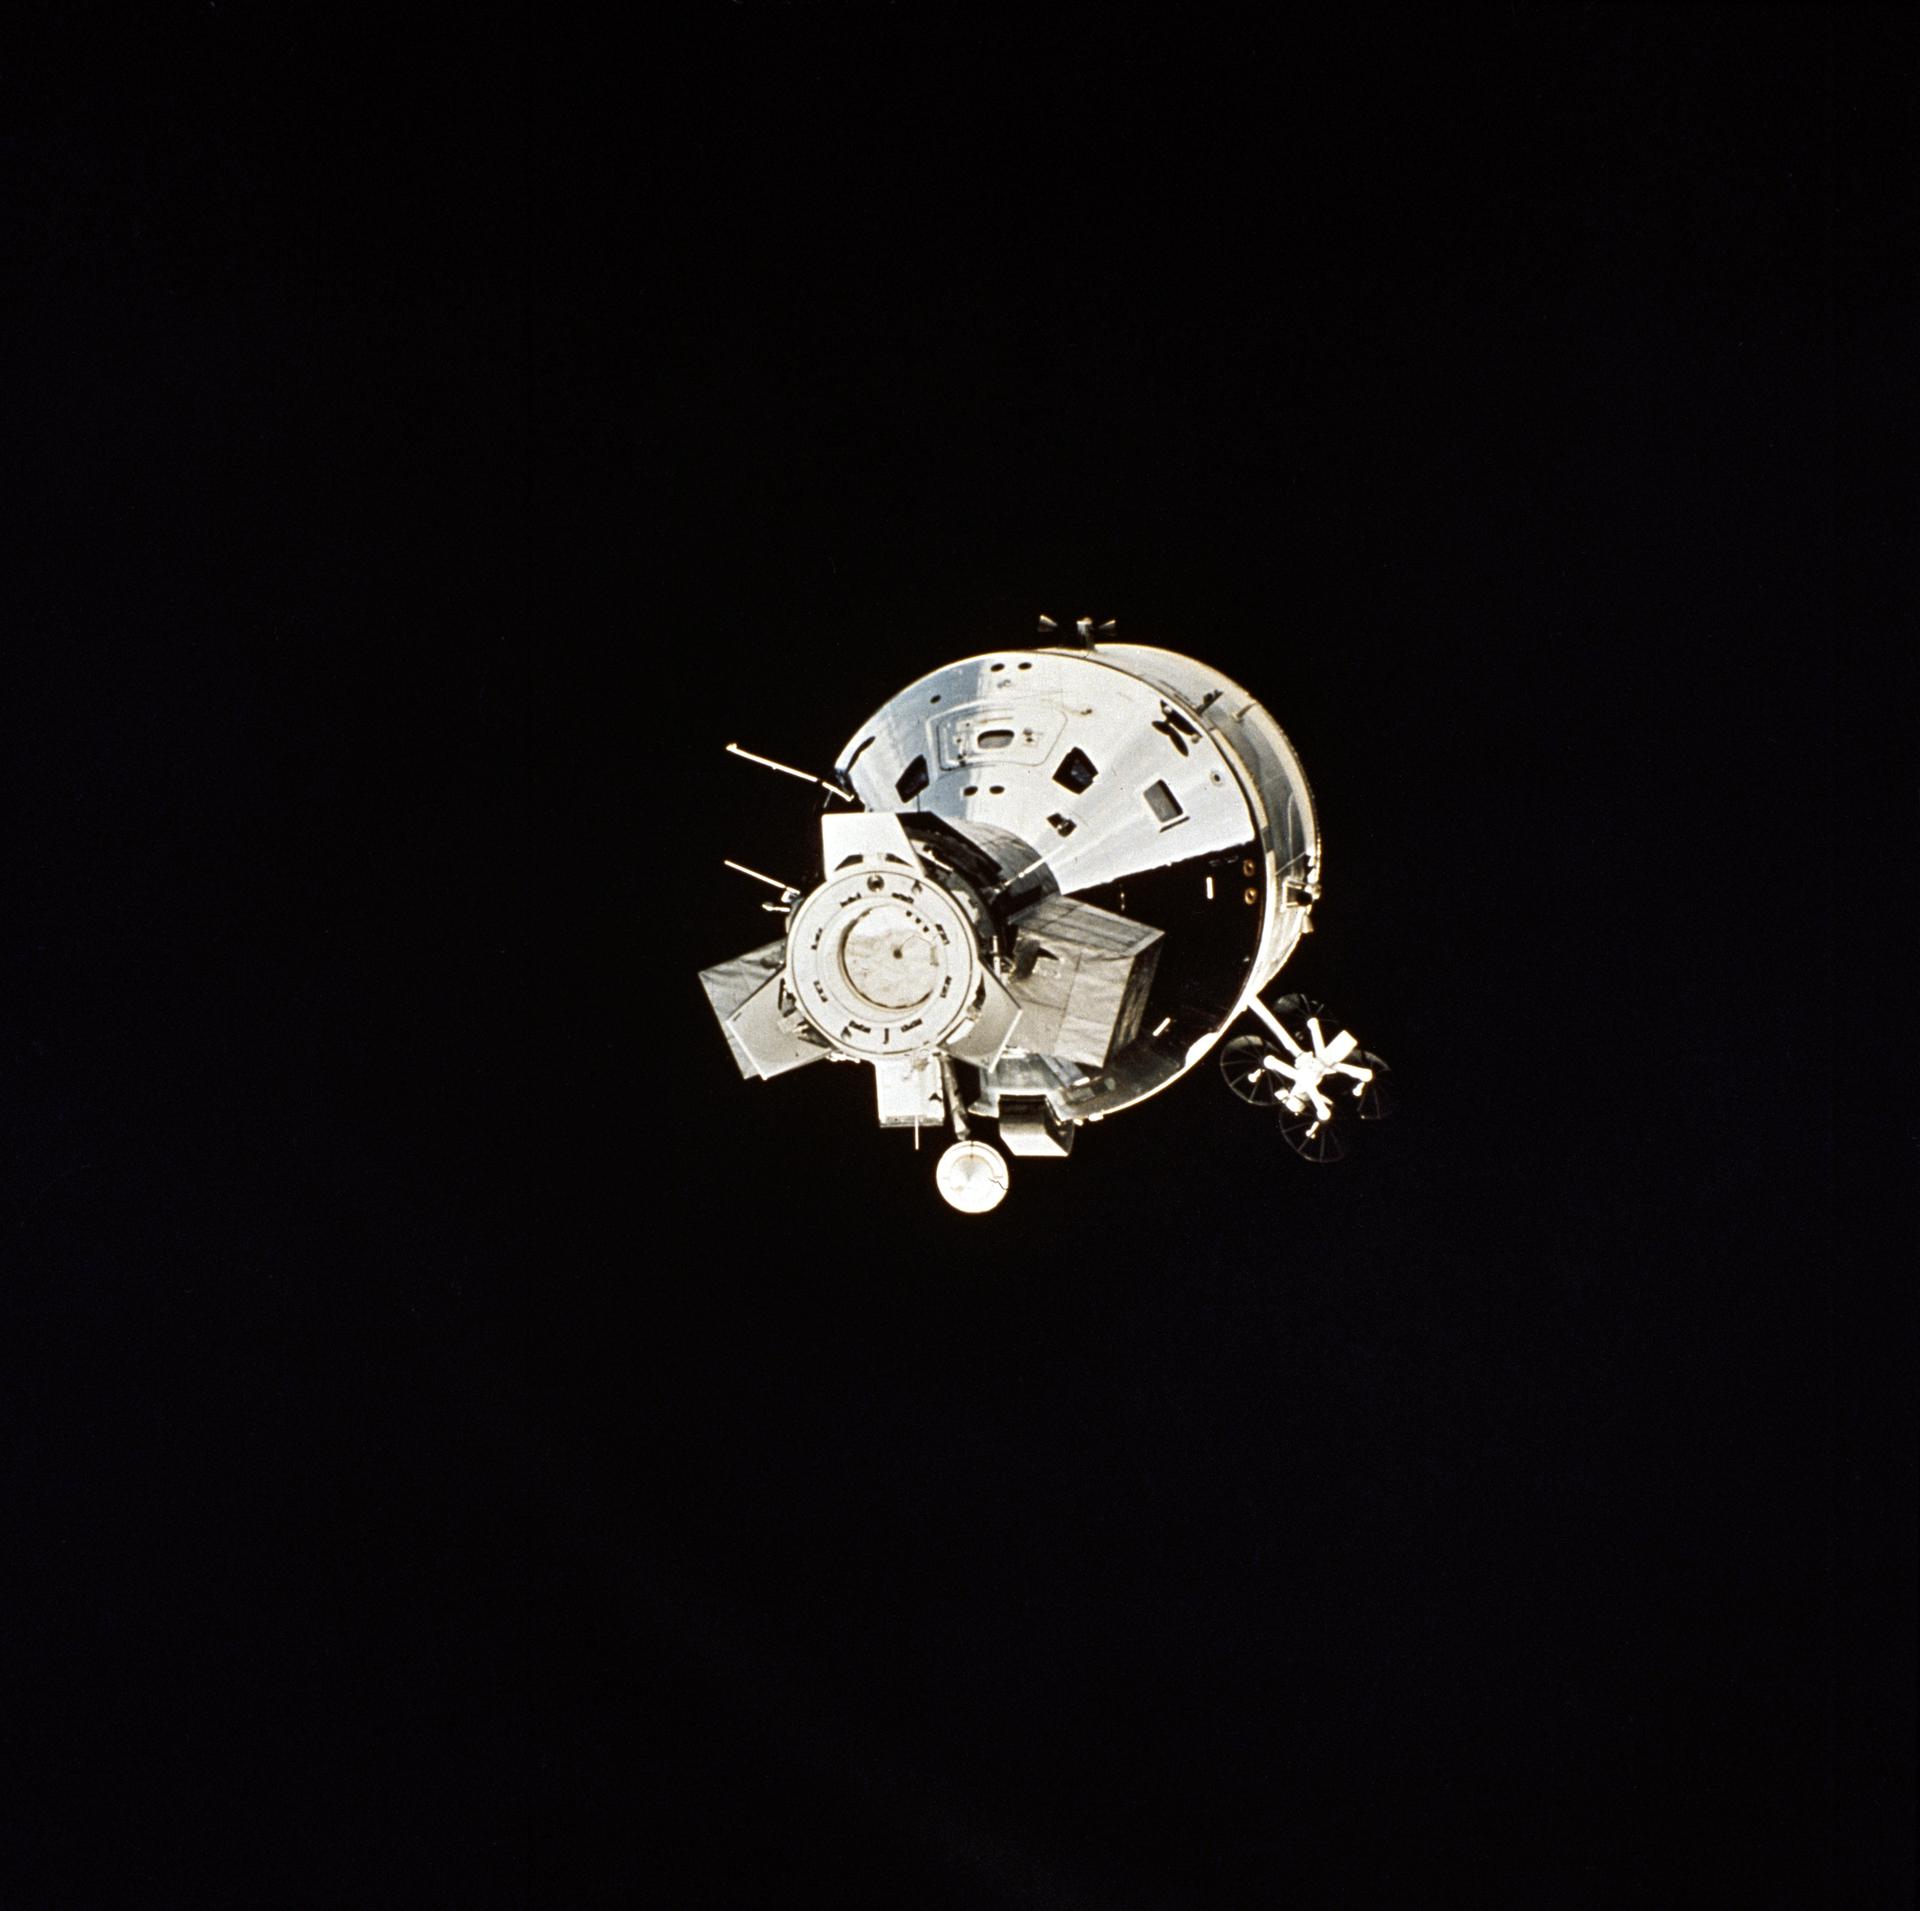 The ASTP Apollo spacecraft seen in space before docking with the Soyuz spacecraft.